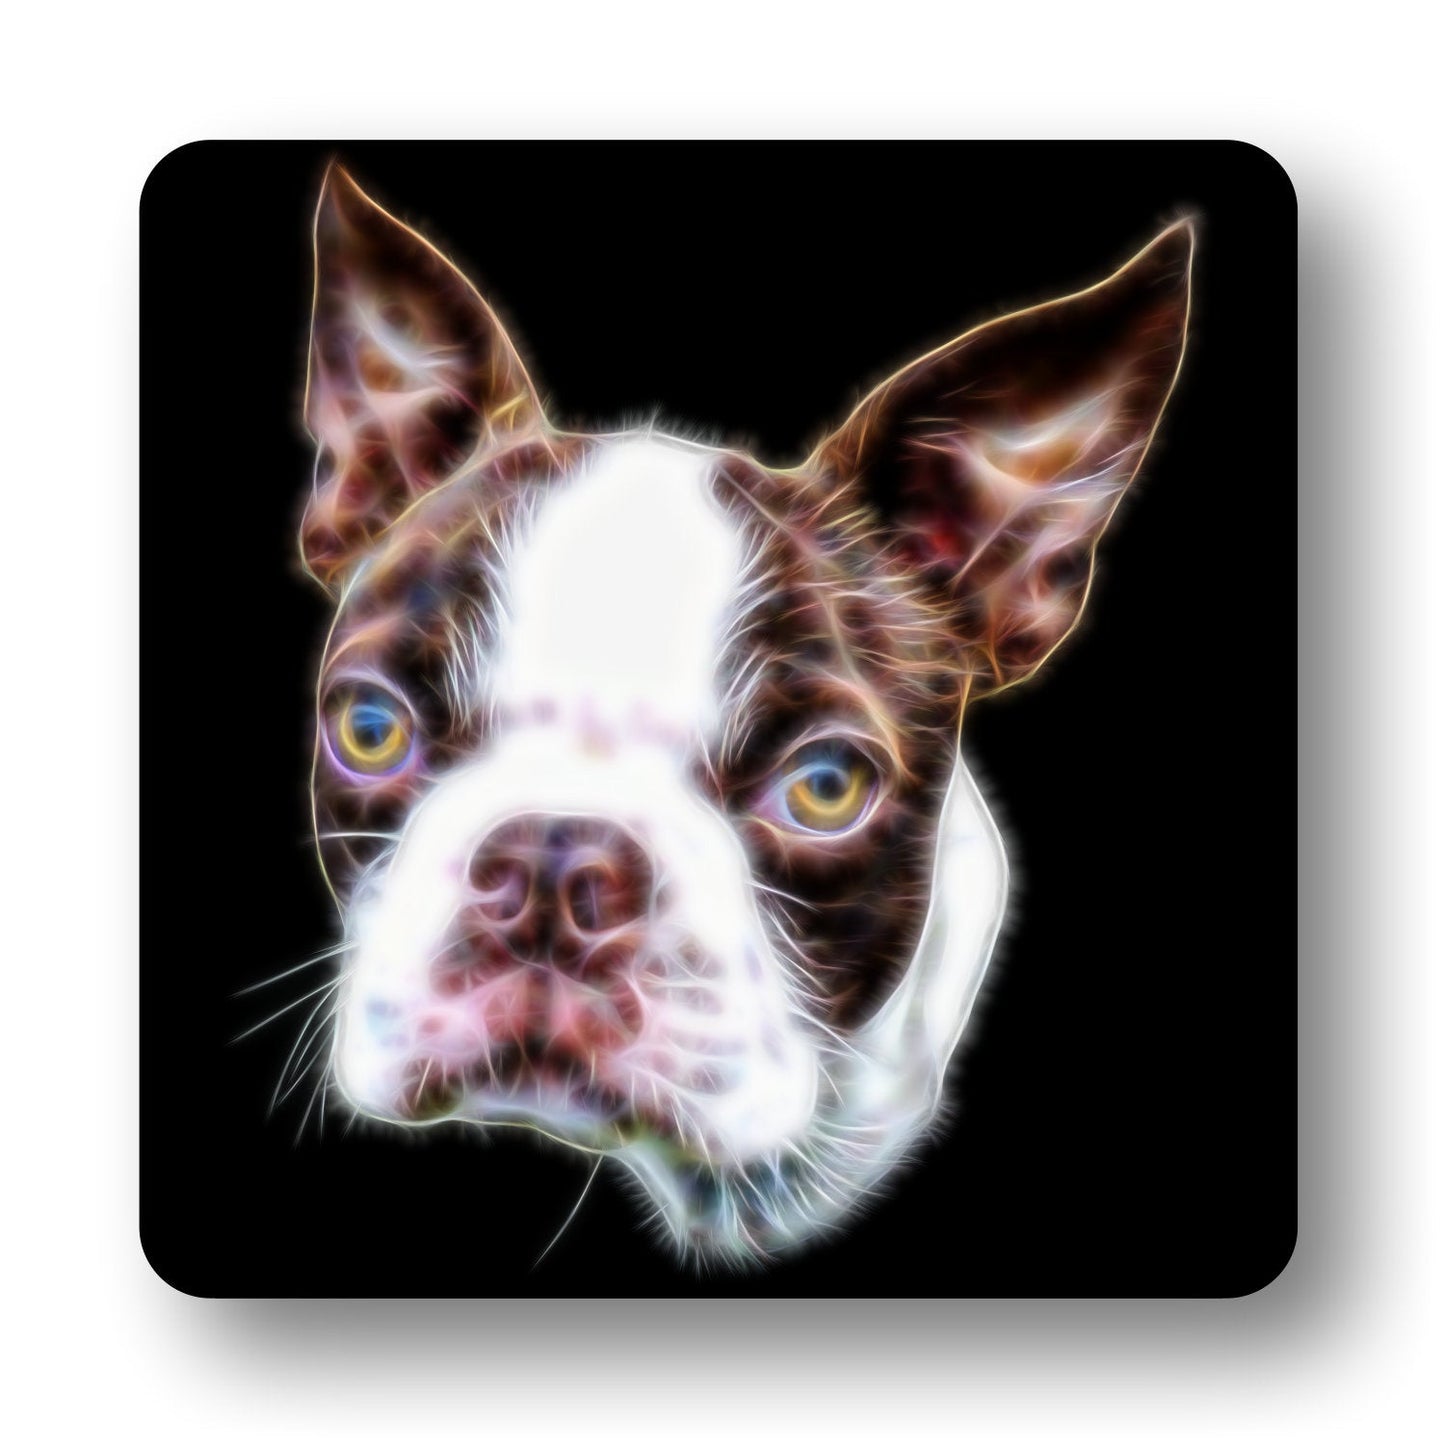 Brown and White Boston Terrier Coasters, Set of 2, with Stunning Fractal Art Design.